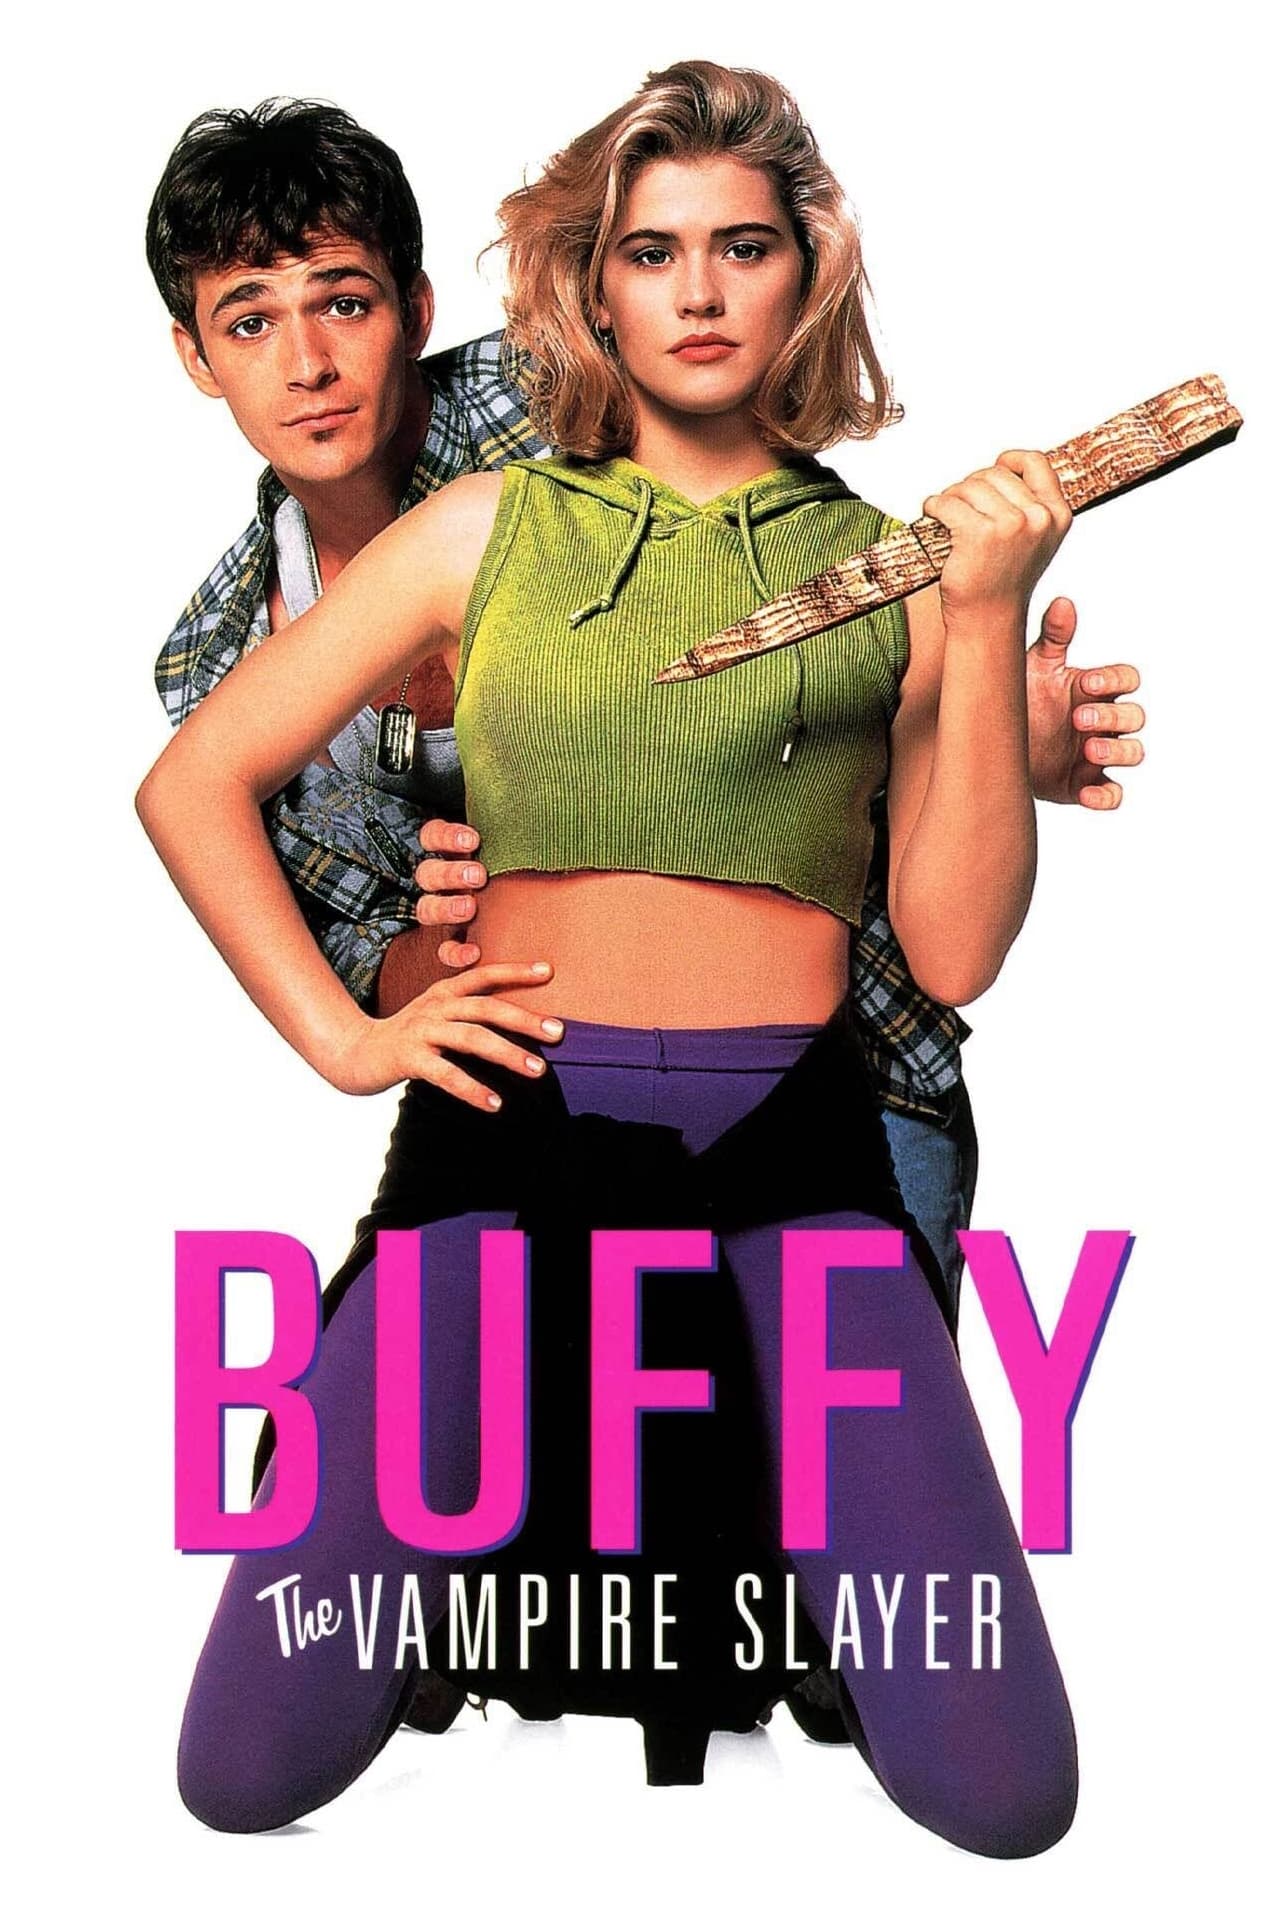 Poster for the movie "Buffy the Vampire Slayer"